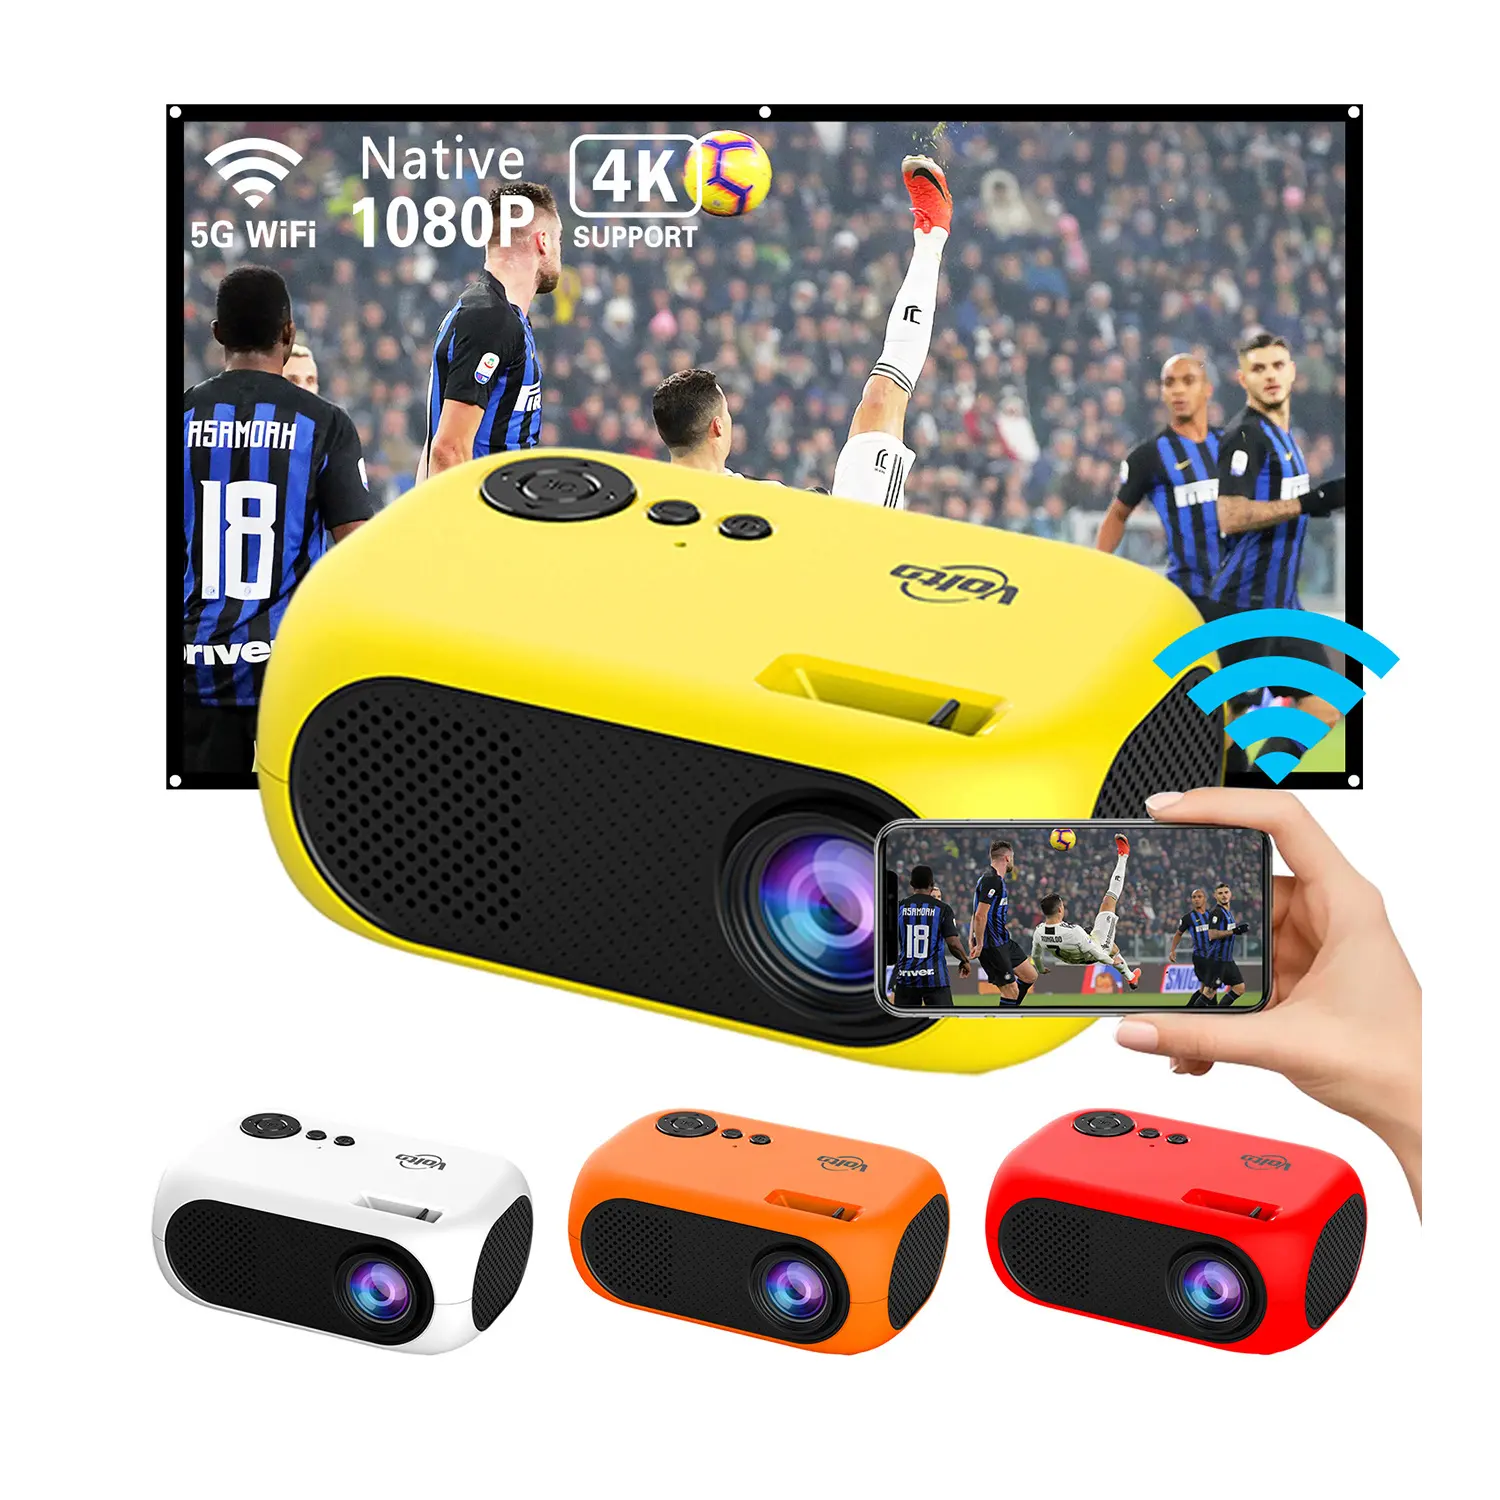 1080p Smart Android Wifi BT 4k mini projectorled high definition Mobile Phone small Projector for Home Theater